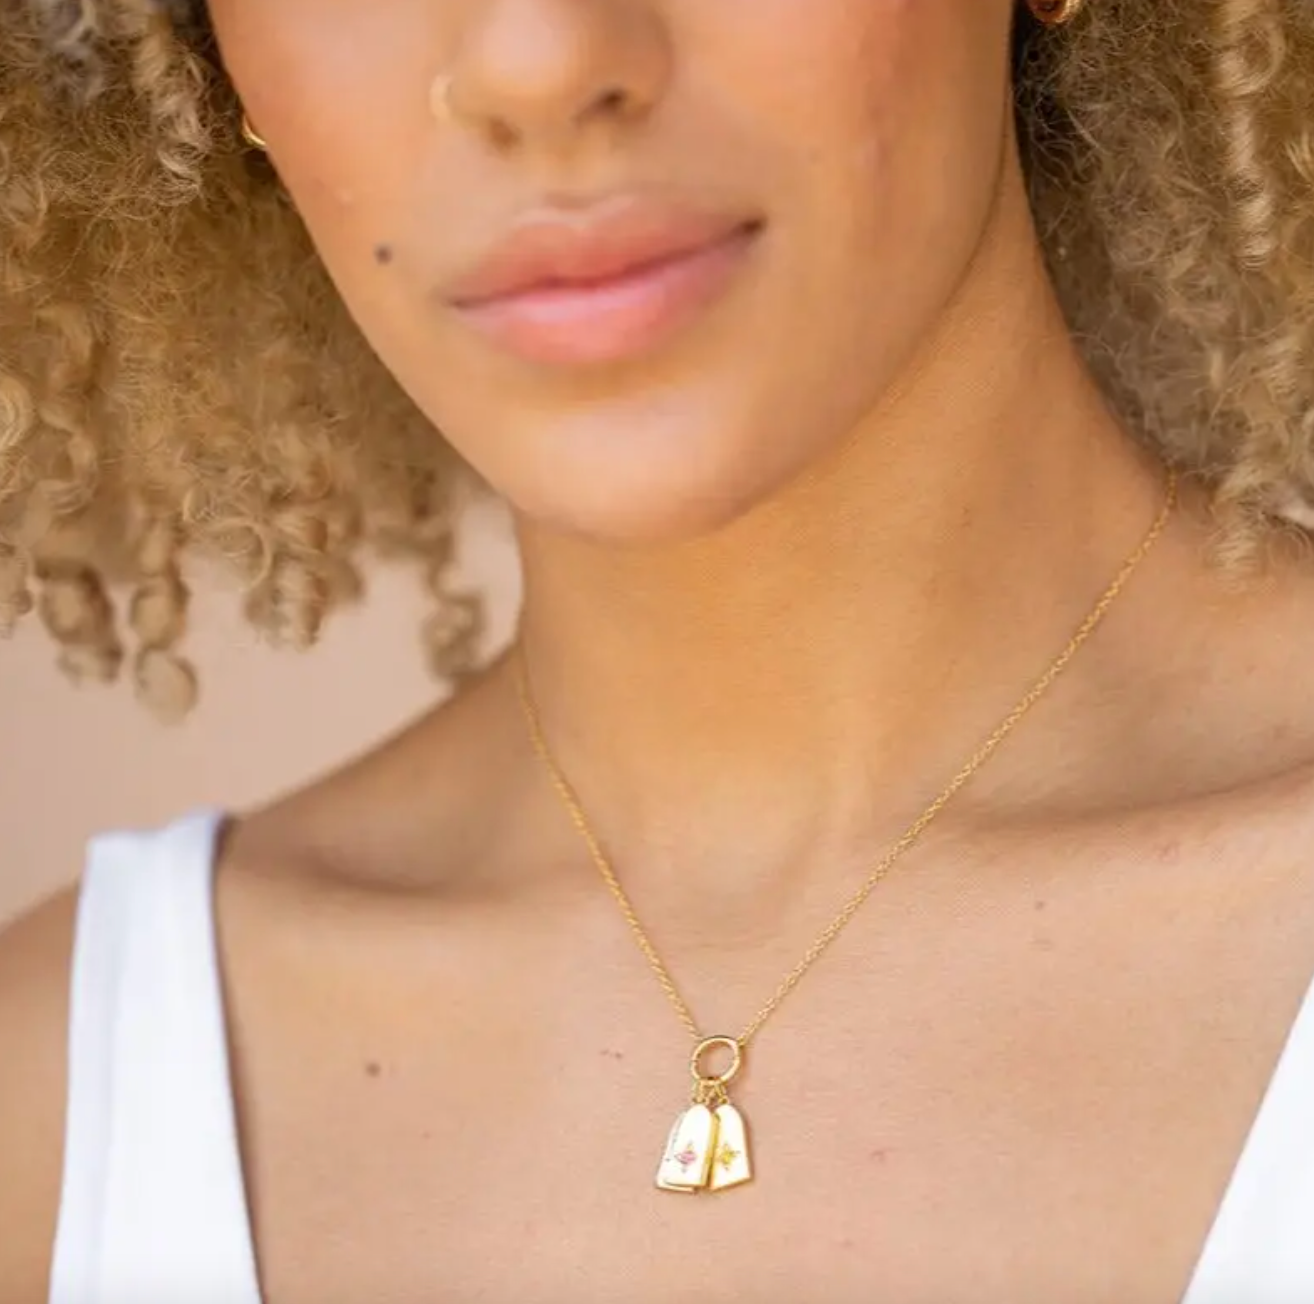 model wearing an iris birthstone charm necklace with two charms